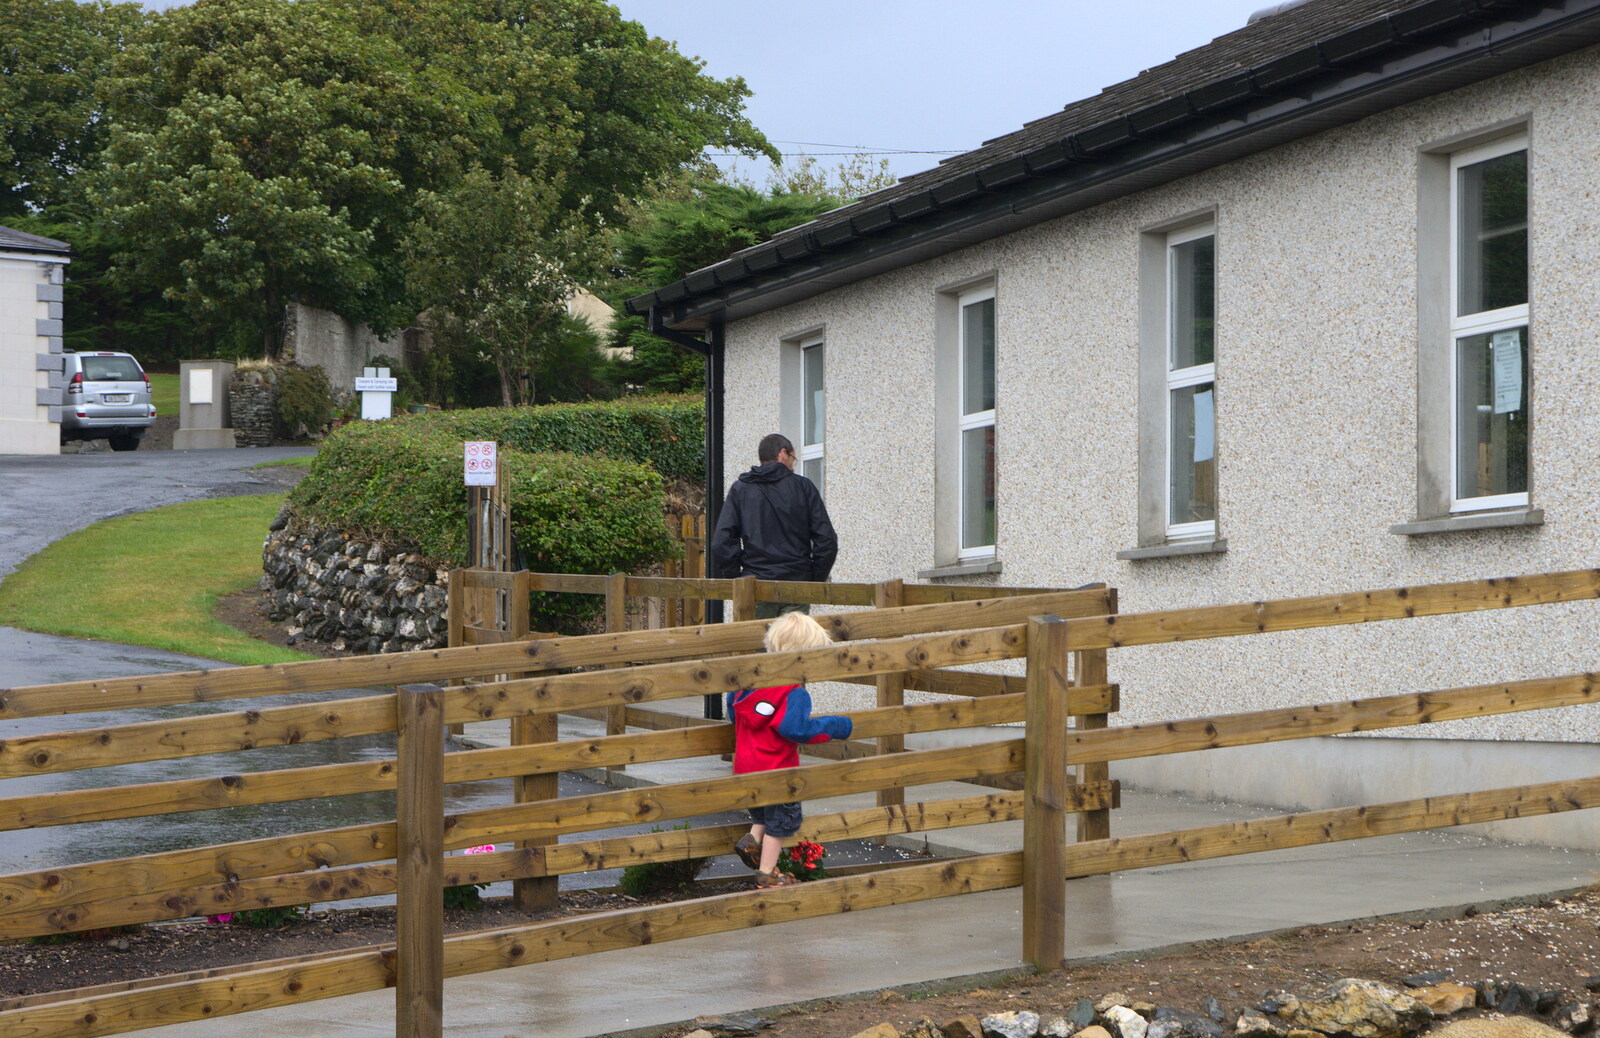 We head up to the site clubhouse from Camping at Silver Strand, Wicklow, County Wicklow, Ireland - 7th August 2014